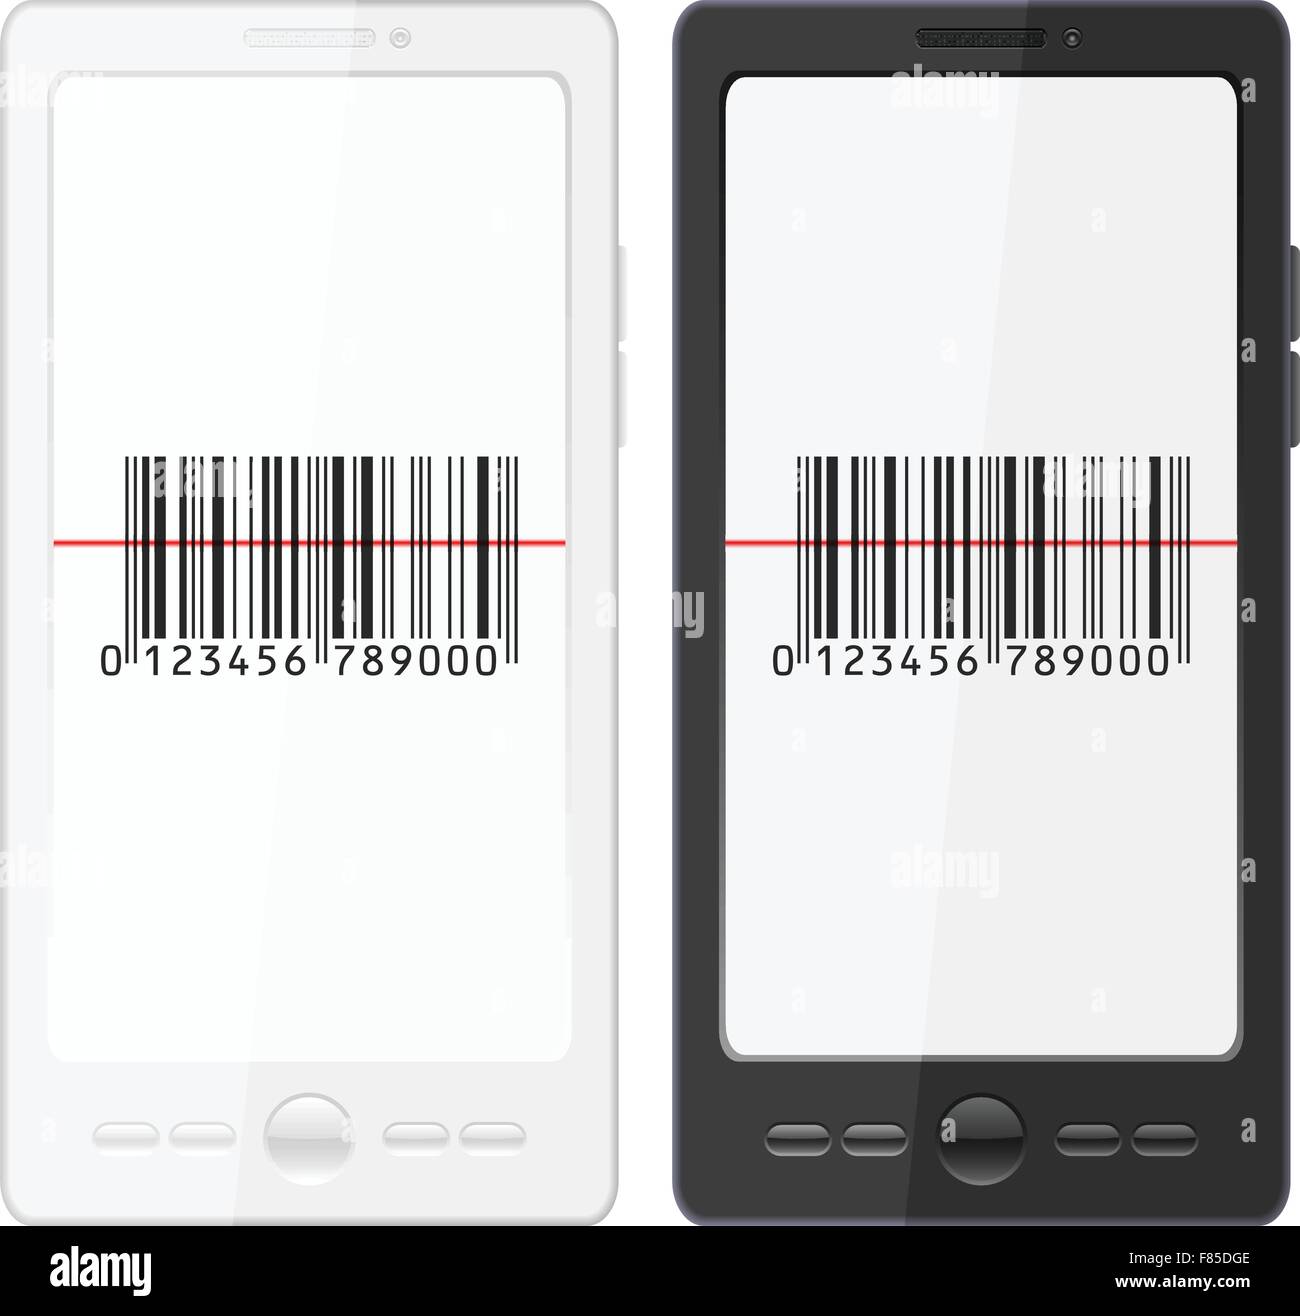 Mobile phone with bar code scanner on a white background. Stock Vector